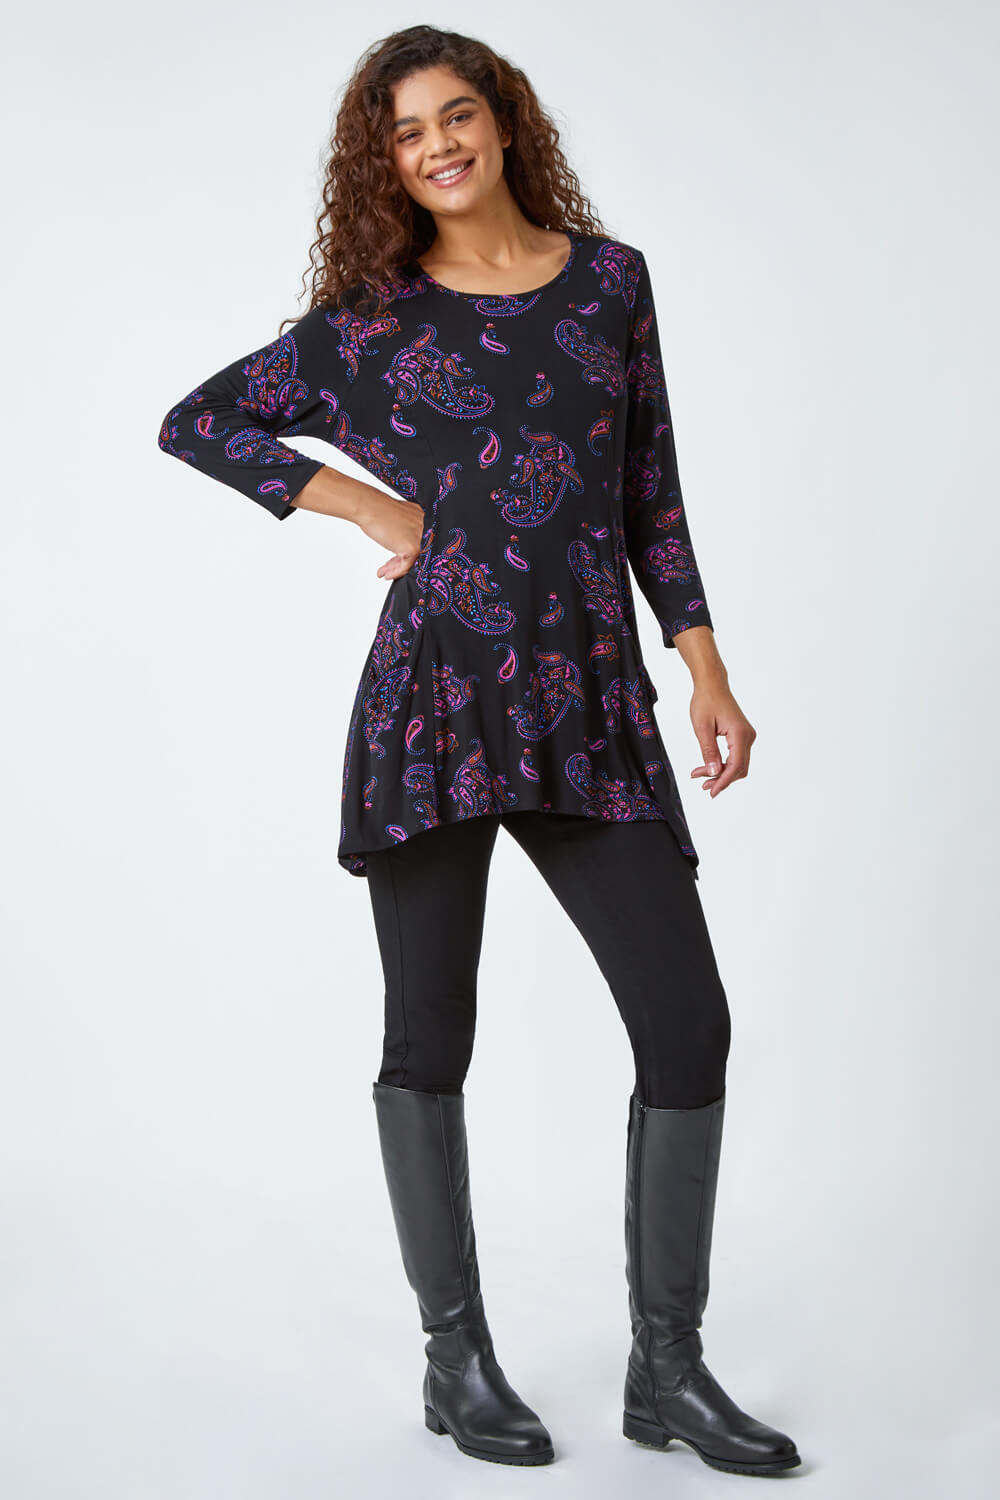 Purple Paisley Pocket Detail Stretch Swing Top, Image 2 of 5